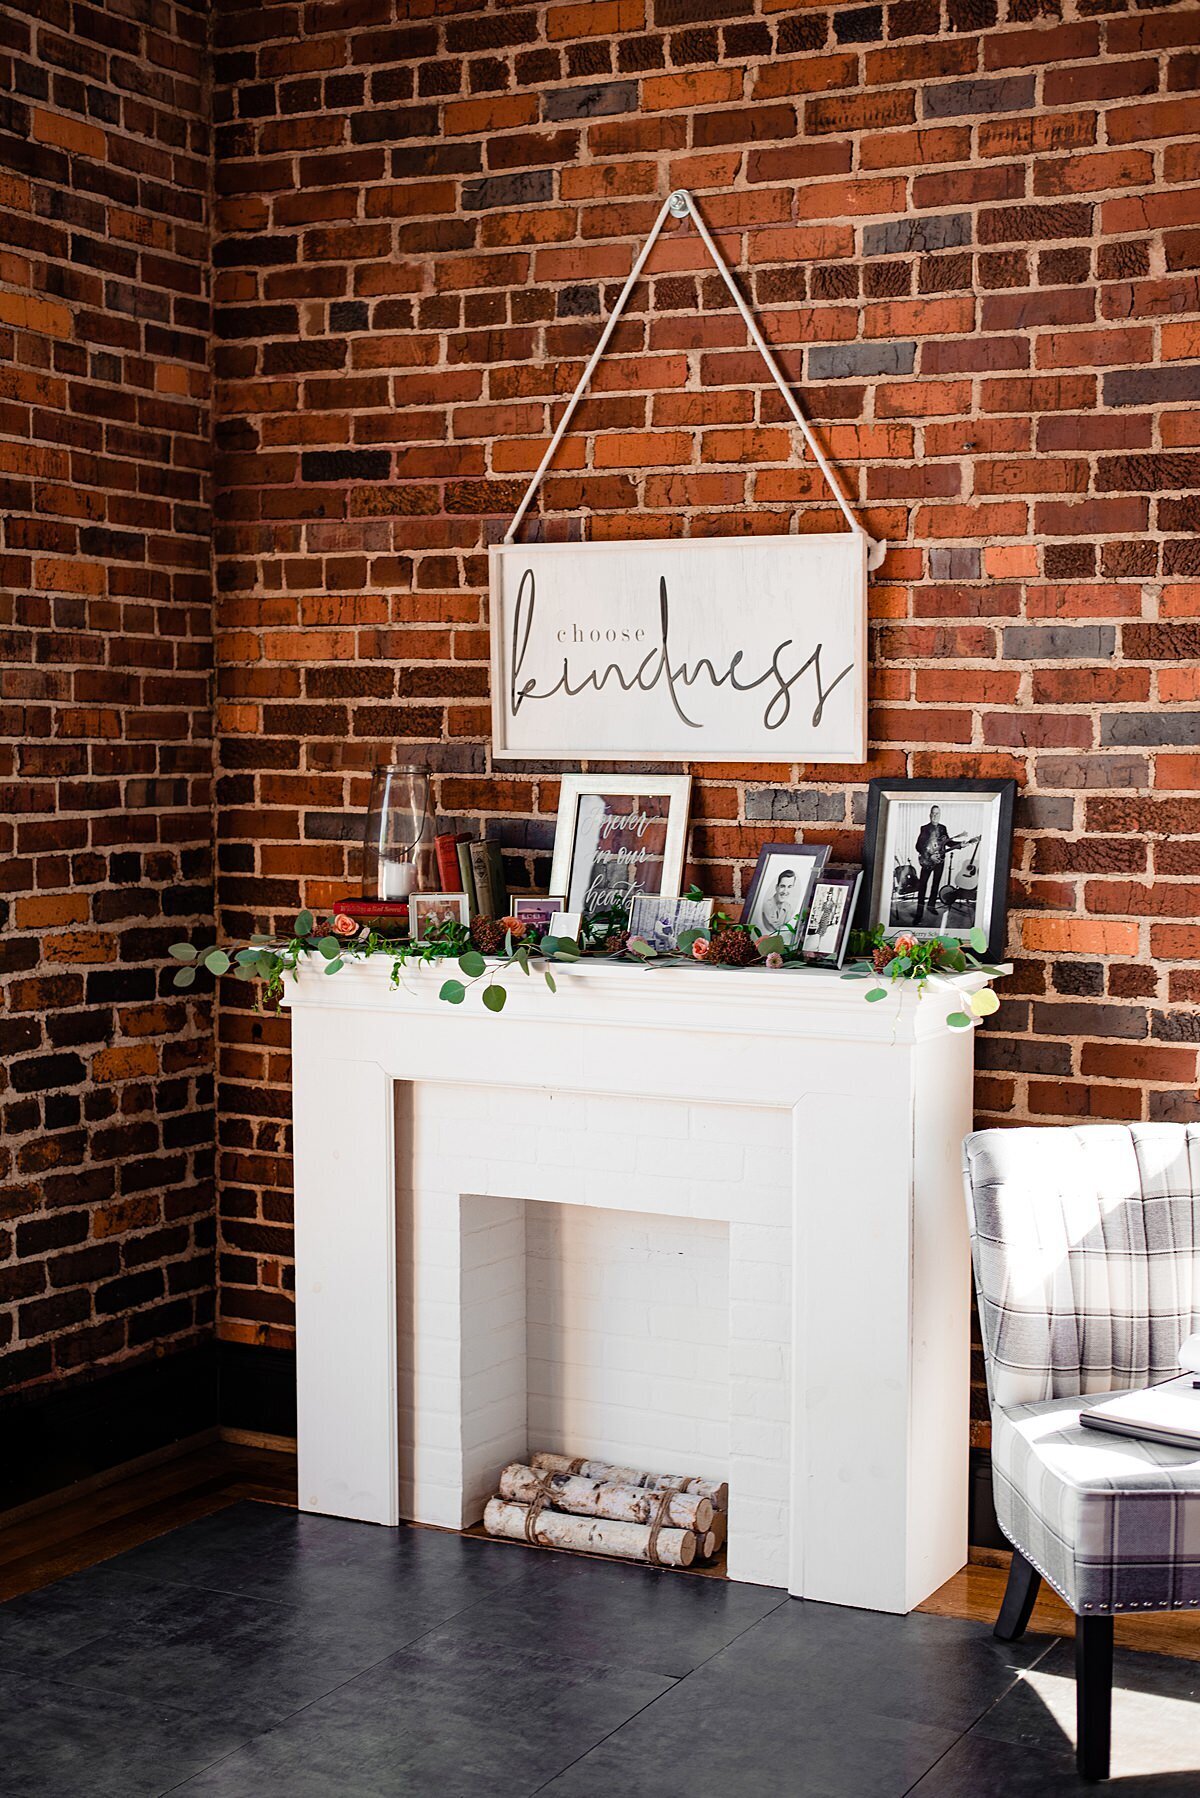 Set against an exposed brick wall is a white mantle with birchwood logs. Above the mantle is a sign that says KINDNESS. Set on the mantle are antique books, a large glass hurricane lantern with a white pillar candle and an assortment of old photographs for a wedding memorial table. Off to the right is a white and gray plaid sofa.